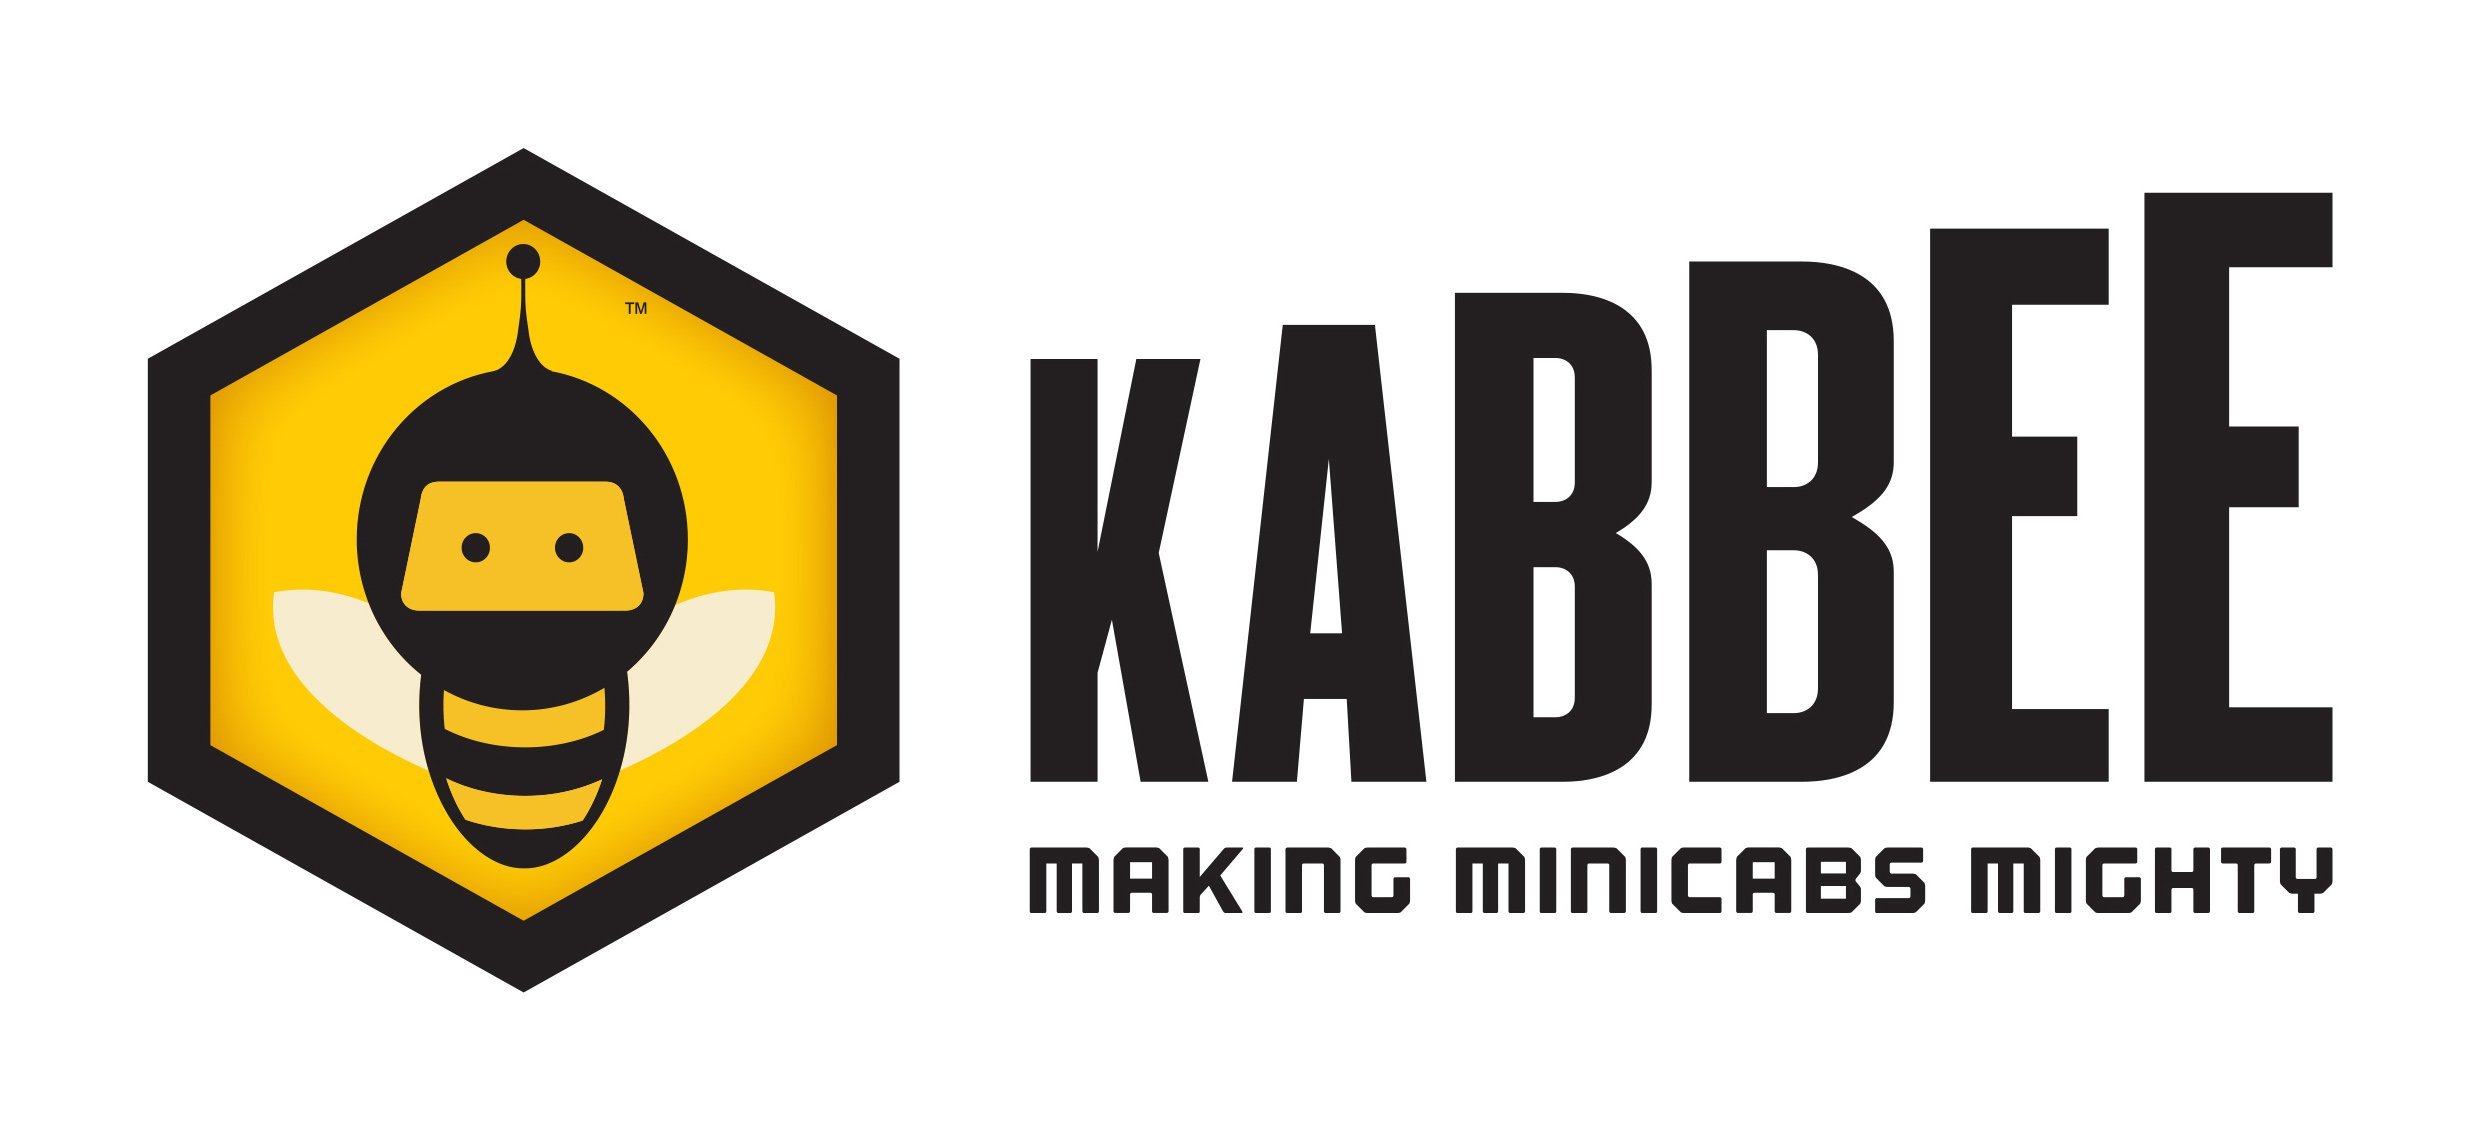 Kabbee Making Minicabs Mighty